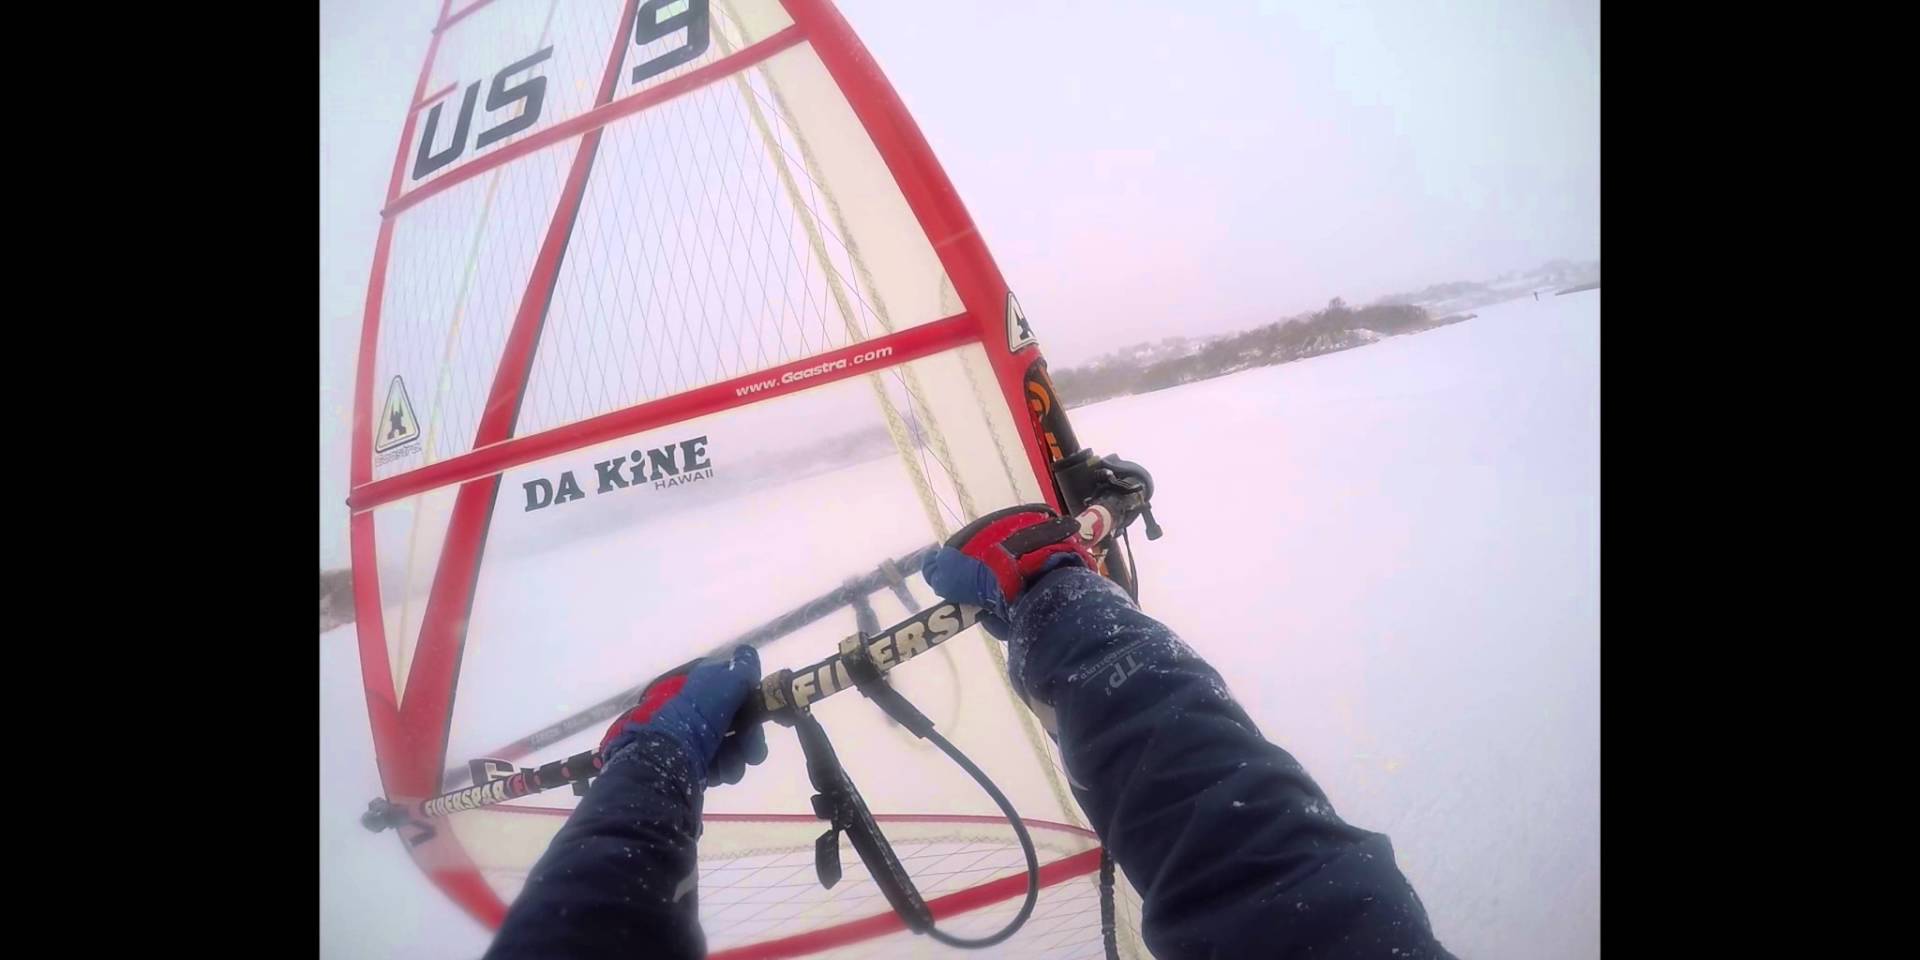 The Sayre Experience – Windsurfing on ice